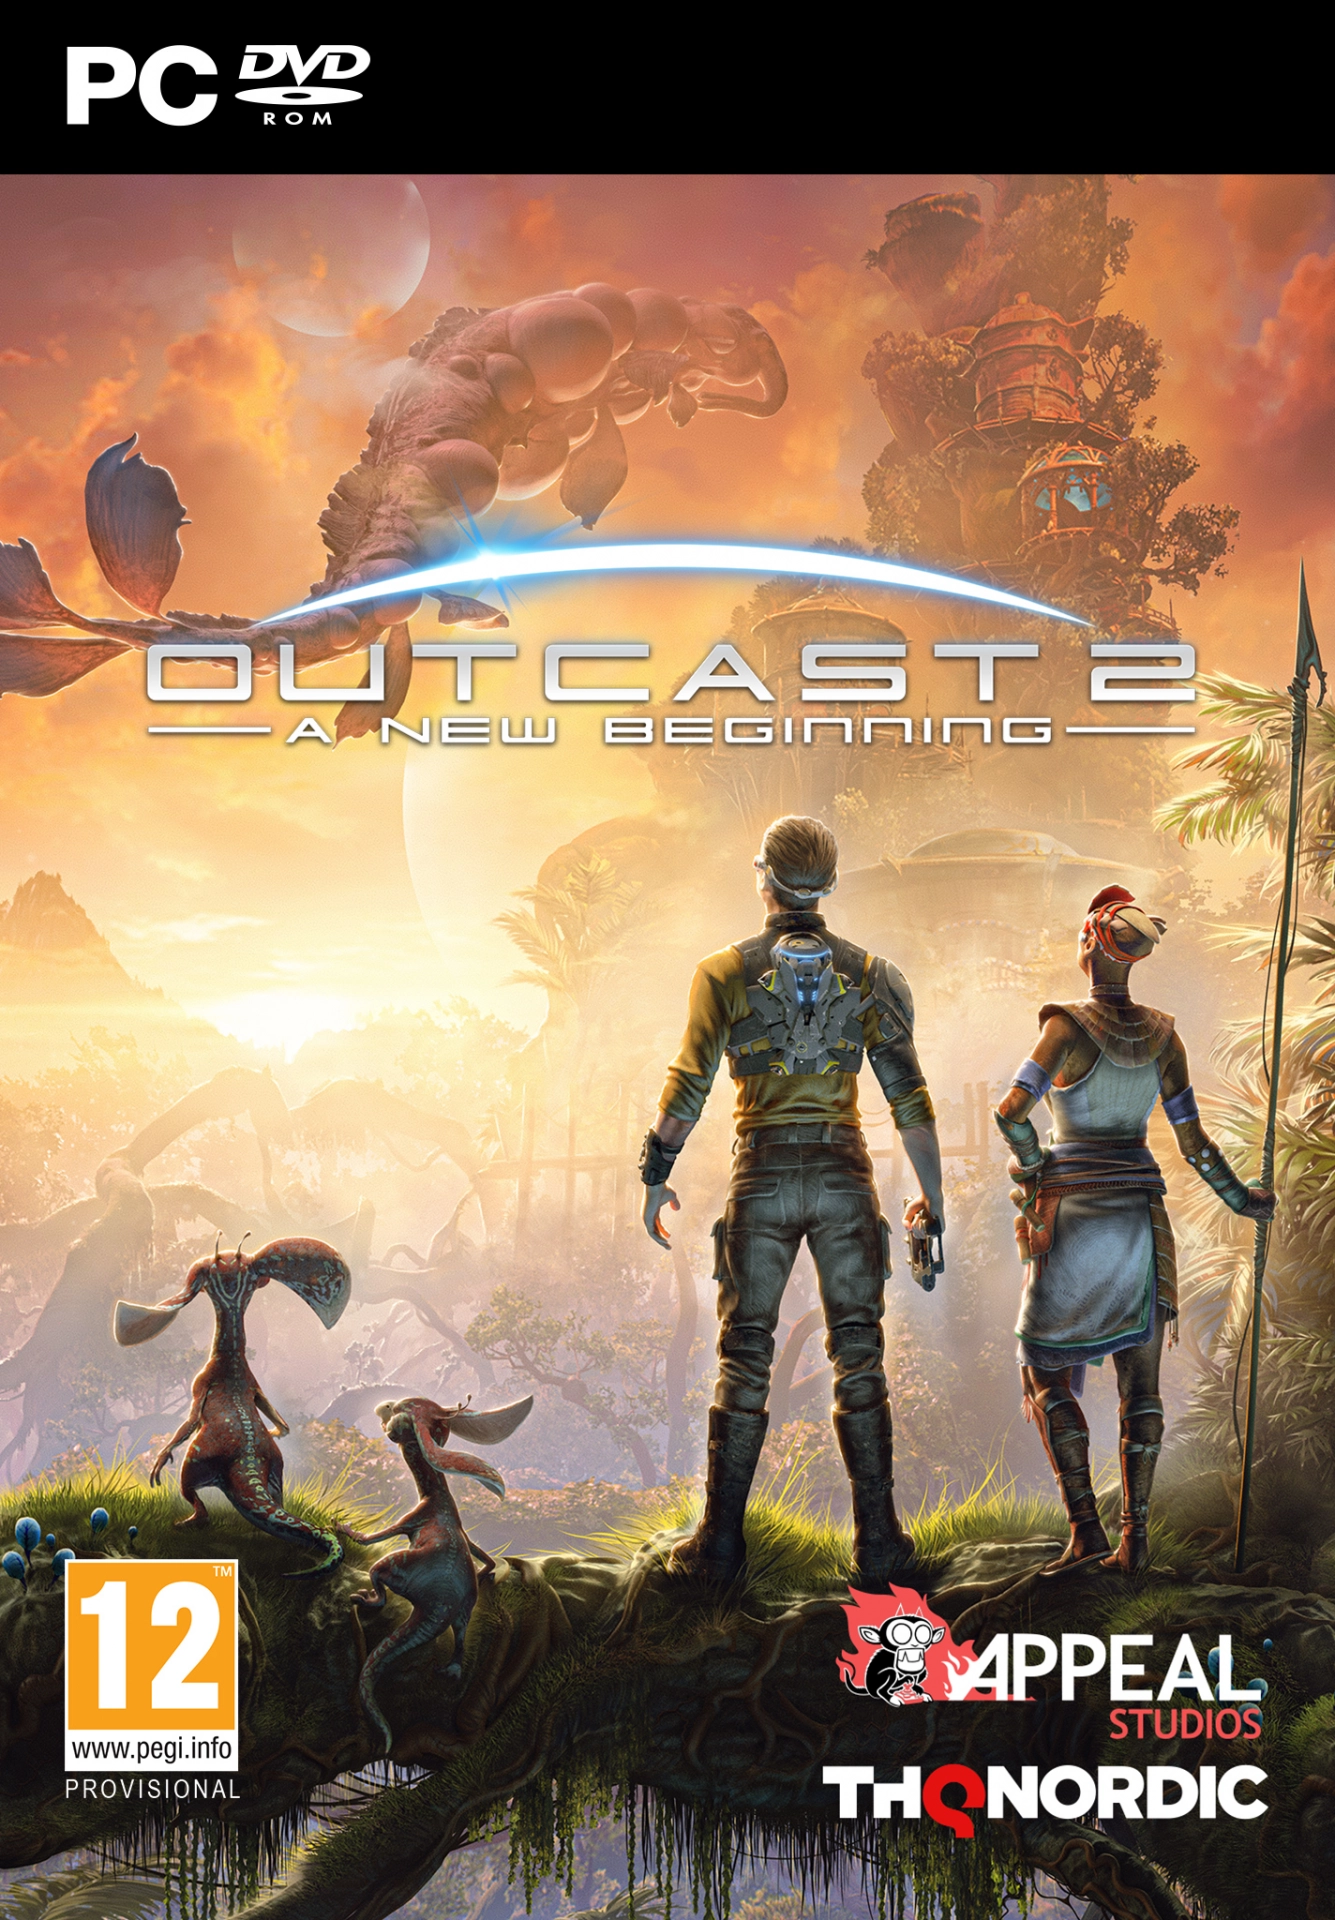 Outcast 2: A New Beginning (PC), THQ Nordic